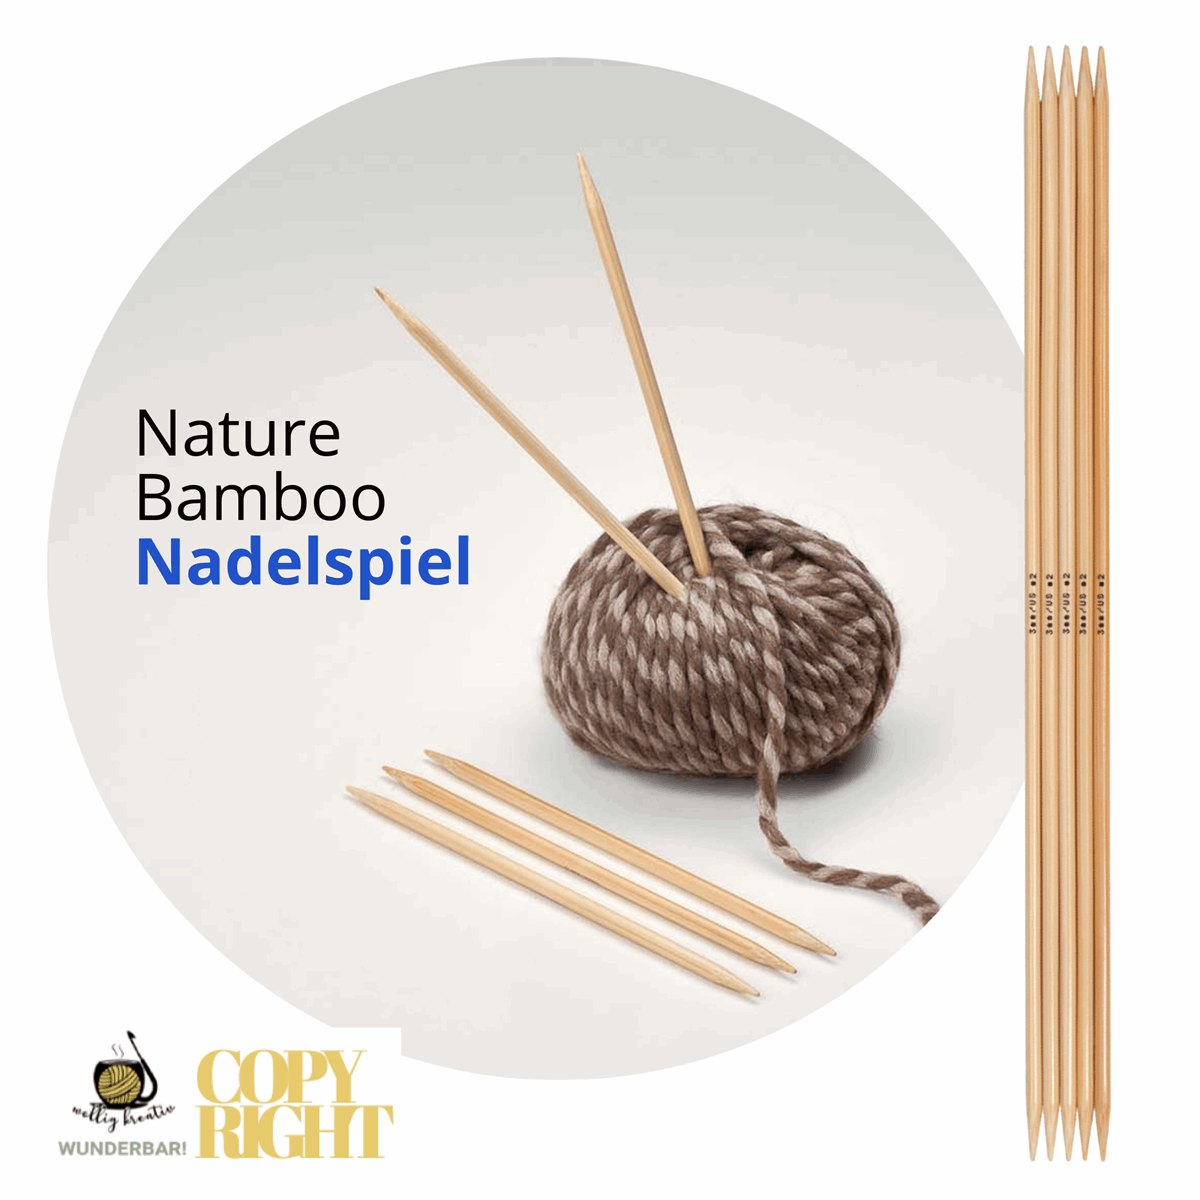 Addi, Nature Bamboo double pointed needles, 65012, size 7 length 15 cm